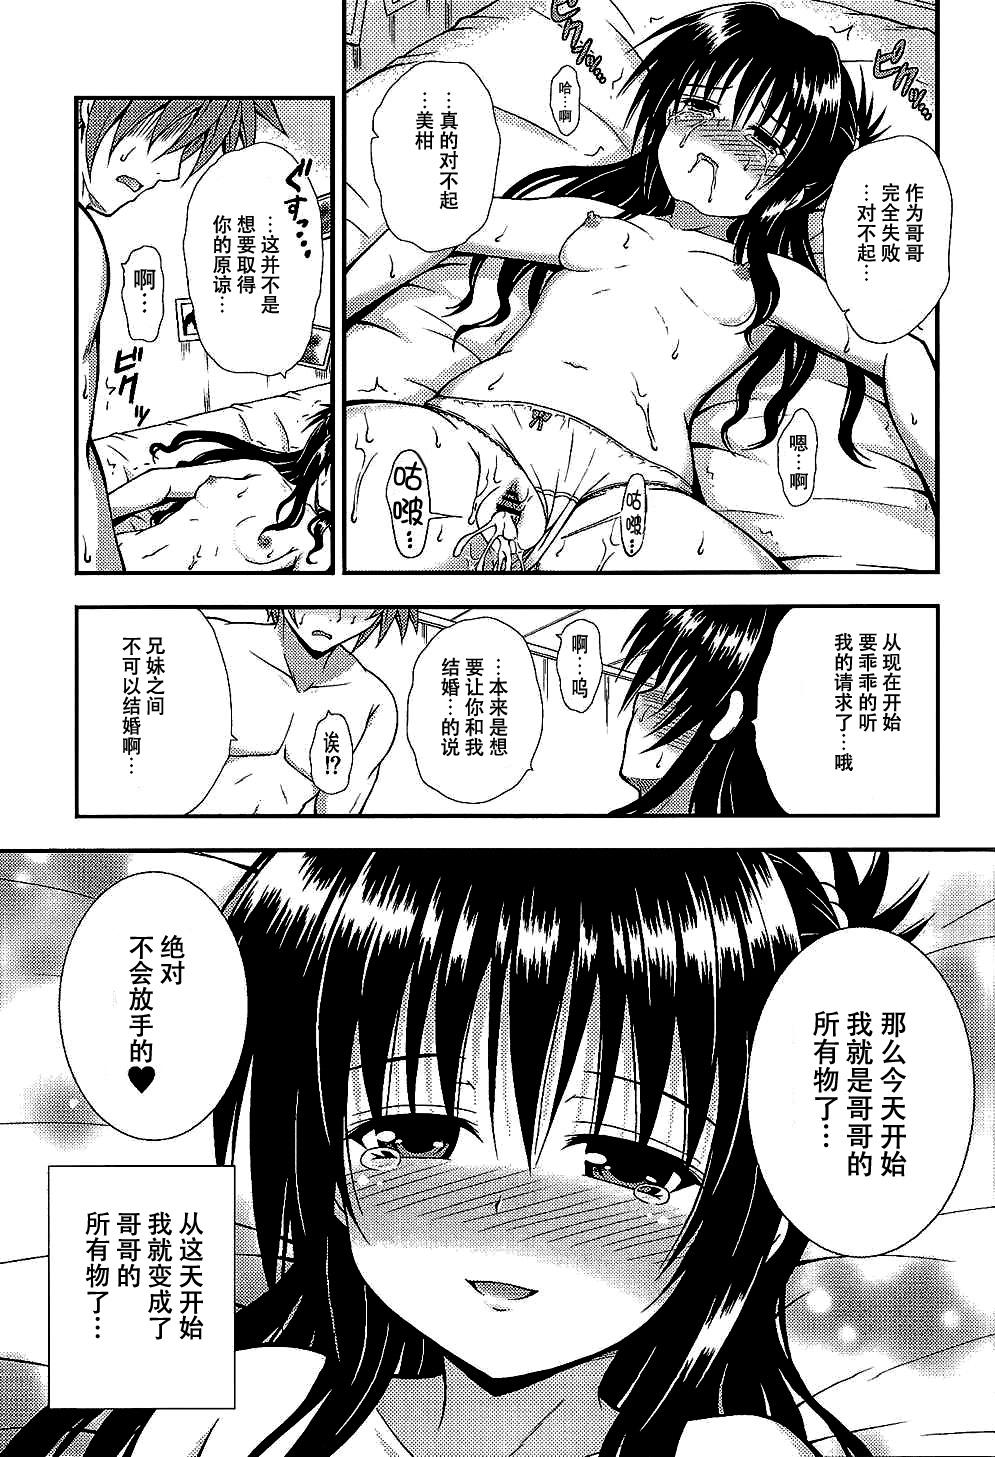 Femboy Onii-chan to Issho - To love-ru Young Petite Porn - Page 9